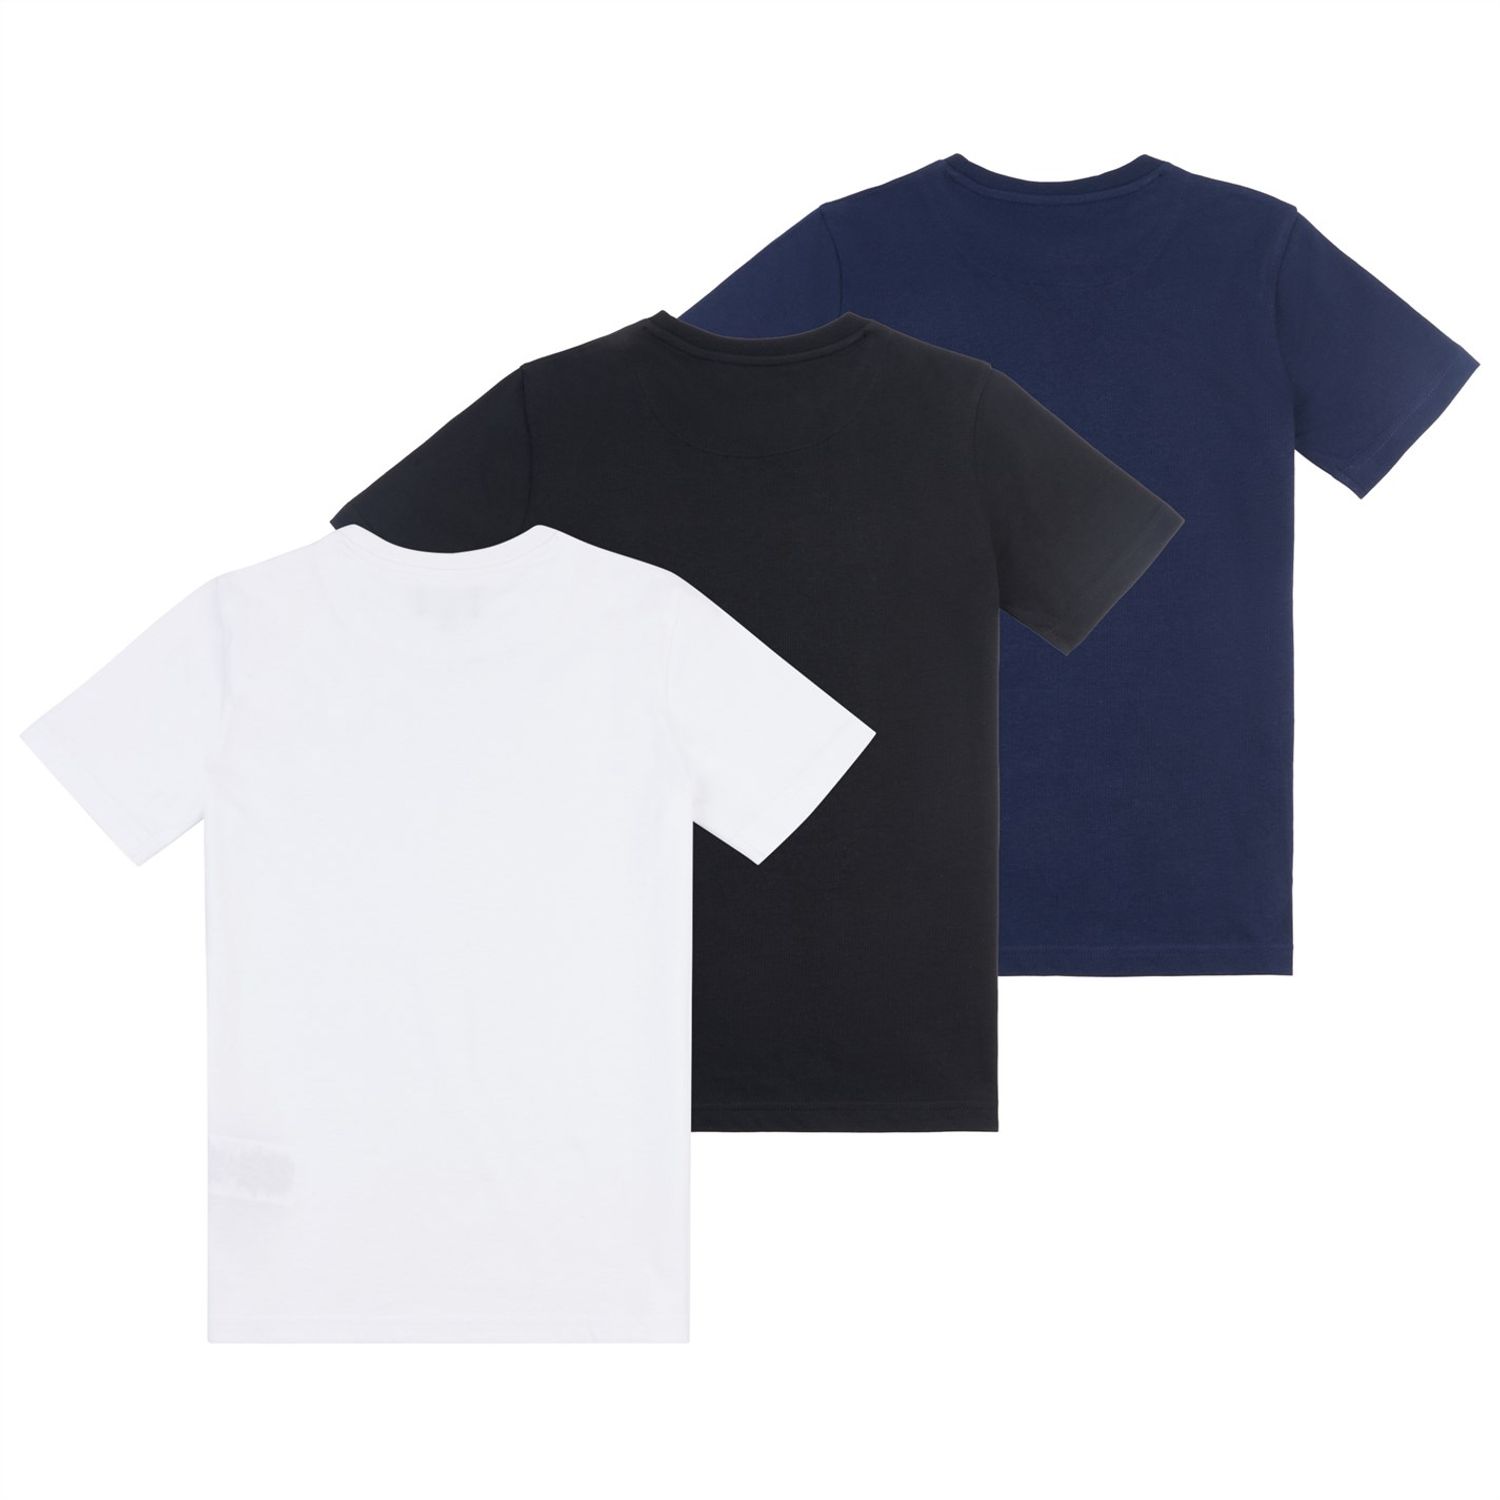 Blue Lyle And Scott Boys 3 Pack T-Shirt - Get The Label